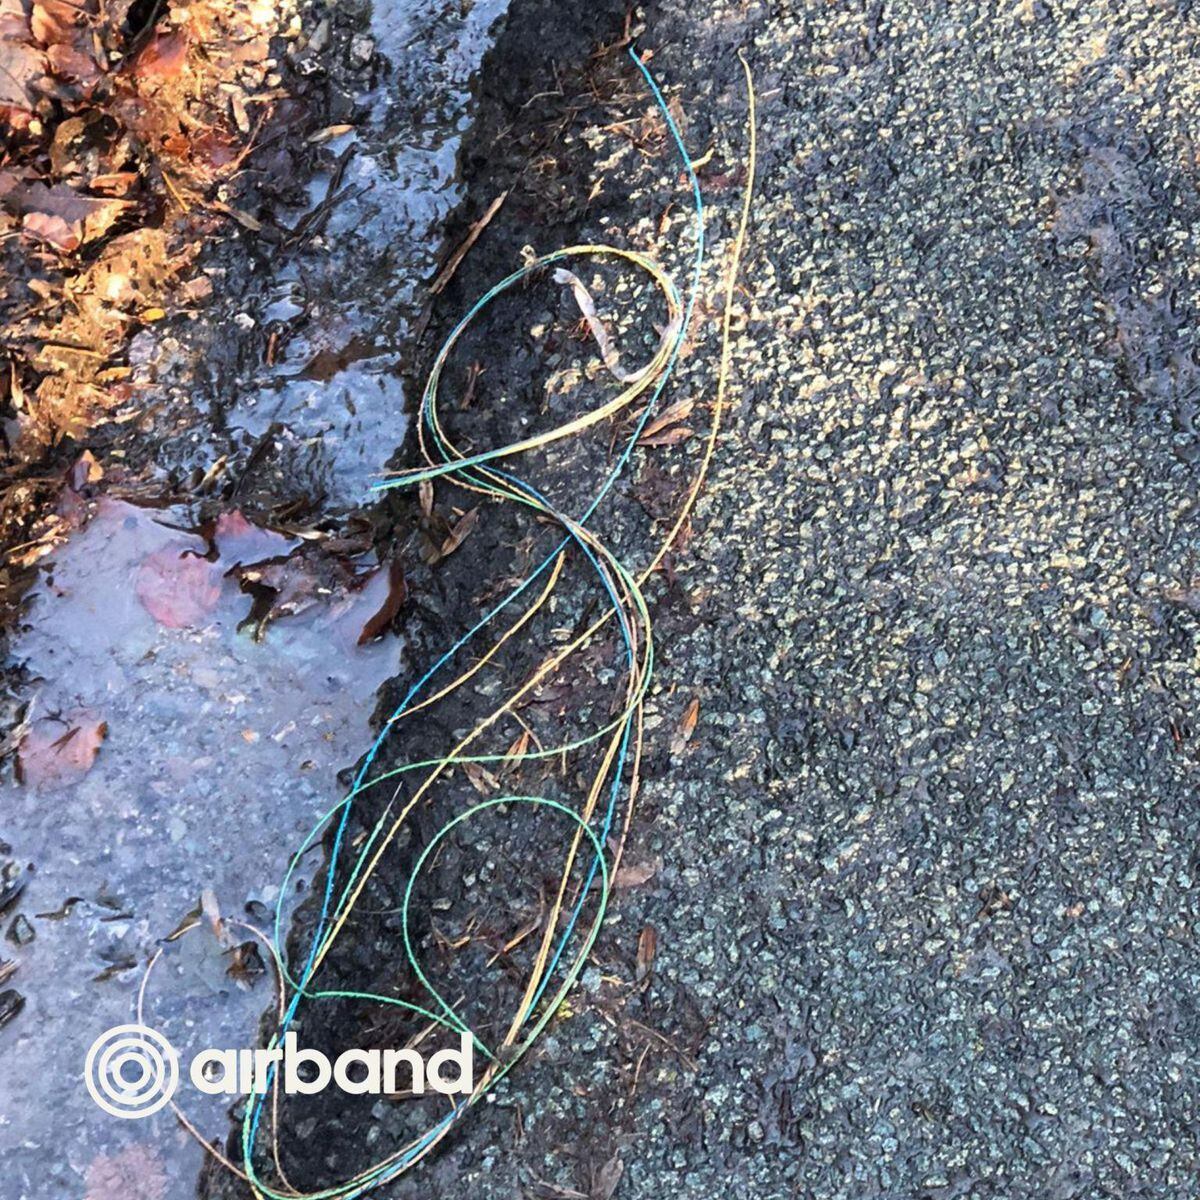 Images of the damage caused to the Airband cables